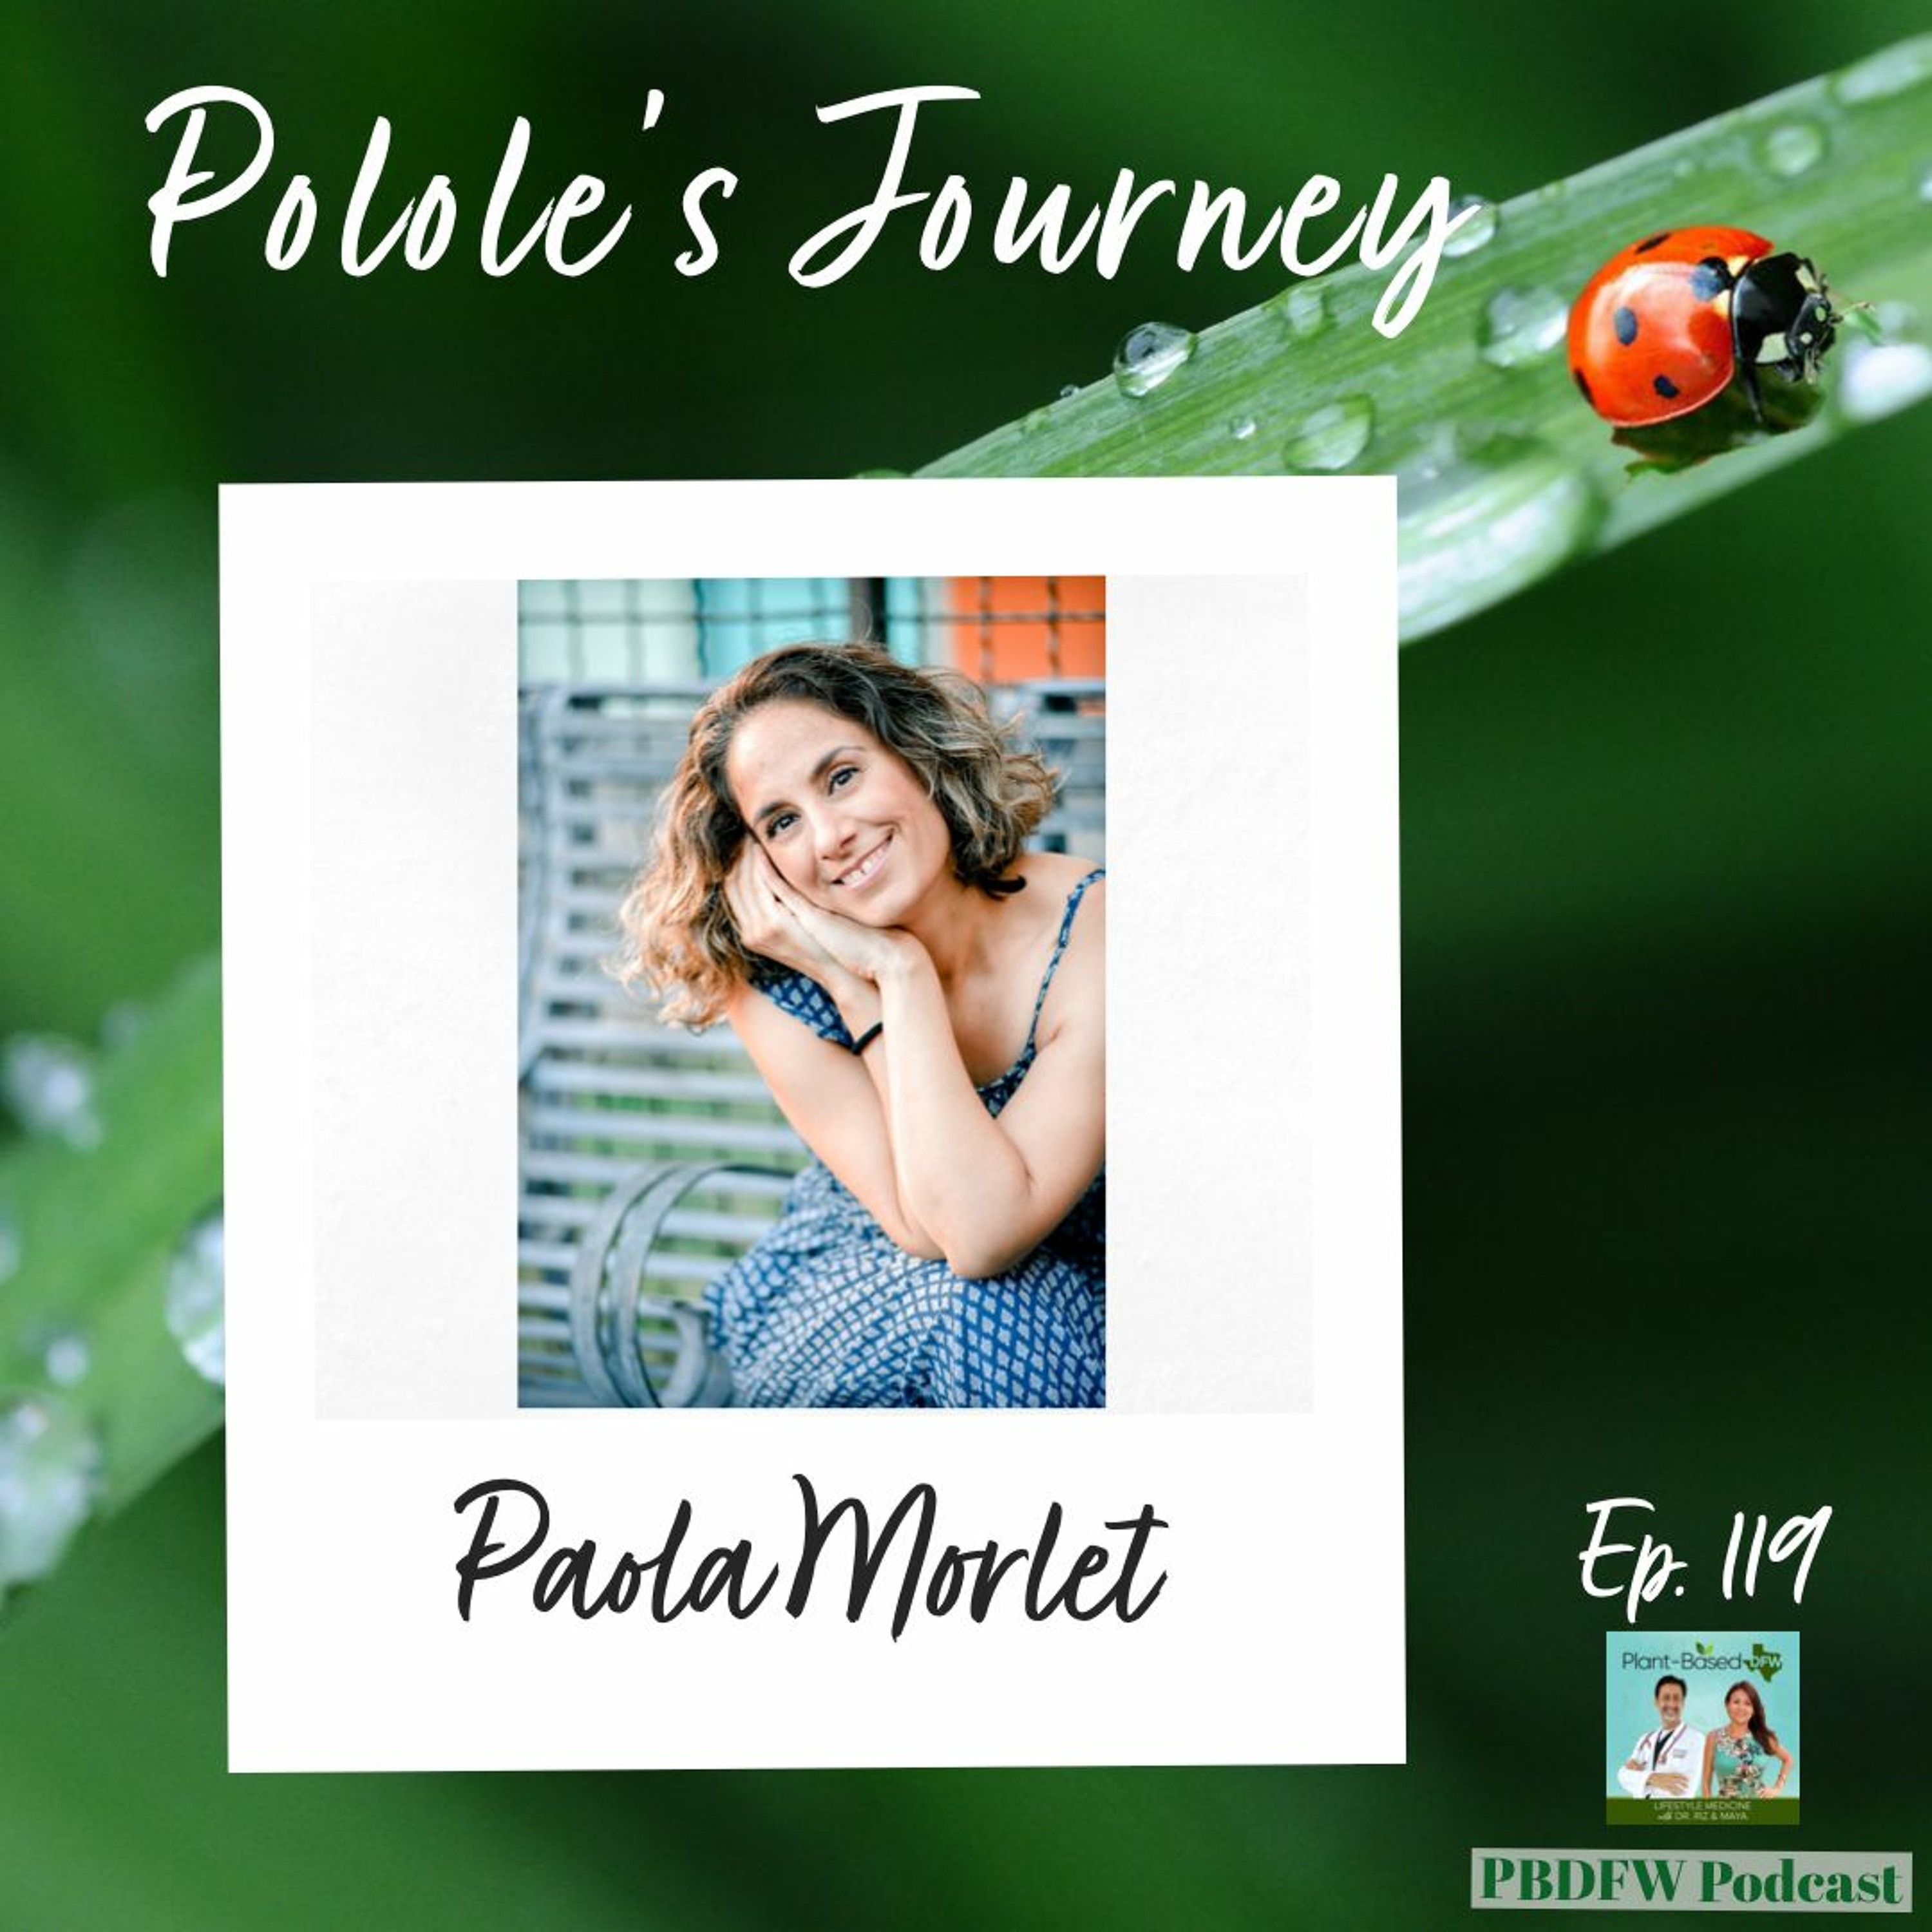 119: Polole's Journey with Paola Morlet (Eng/Spa) Image